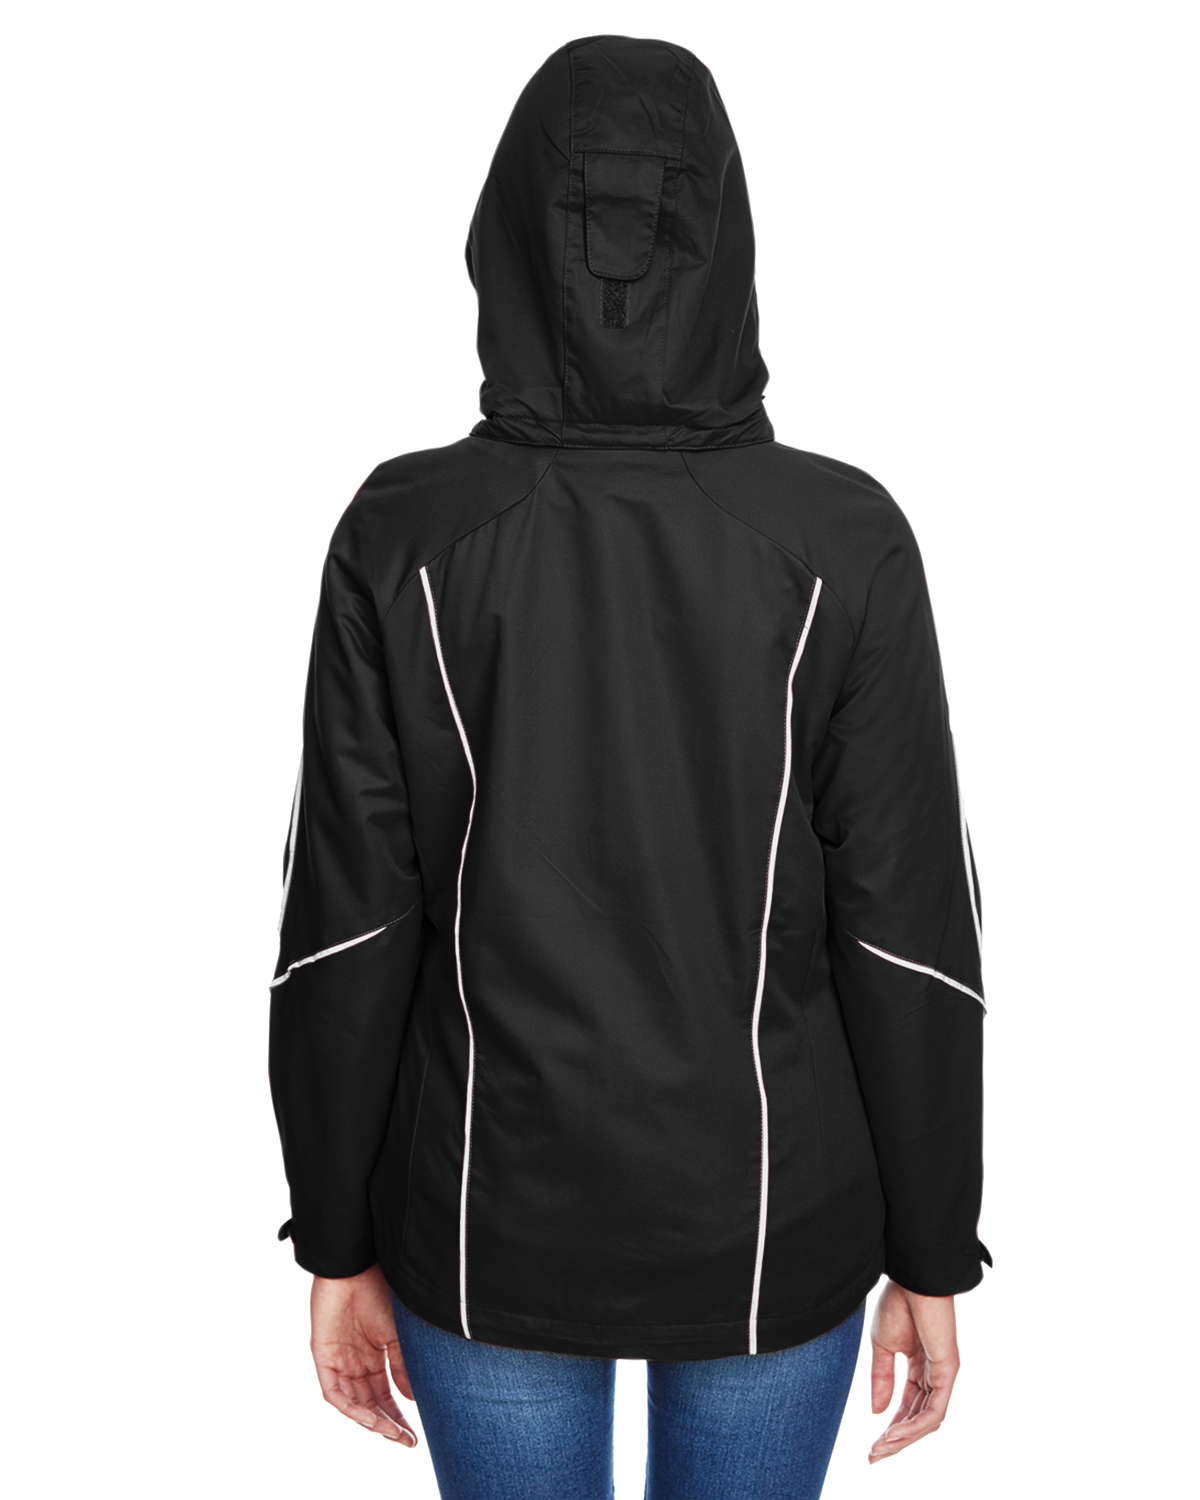 Ladies' Angle 3-in-1 Jacket with Bonded Fleece Liner - BLACK - L - image 2 of 3